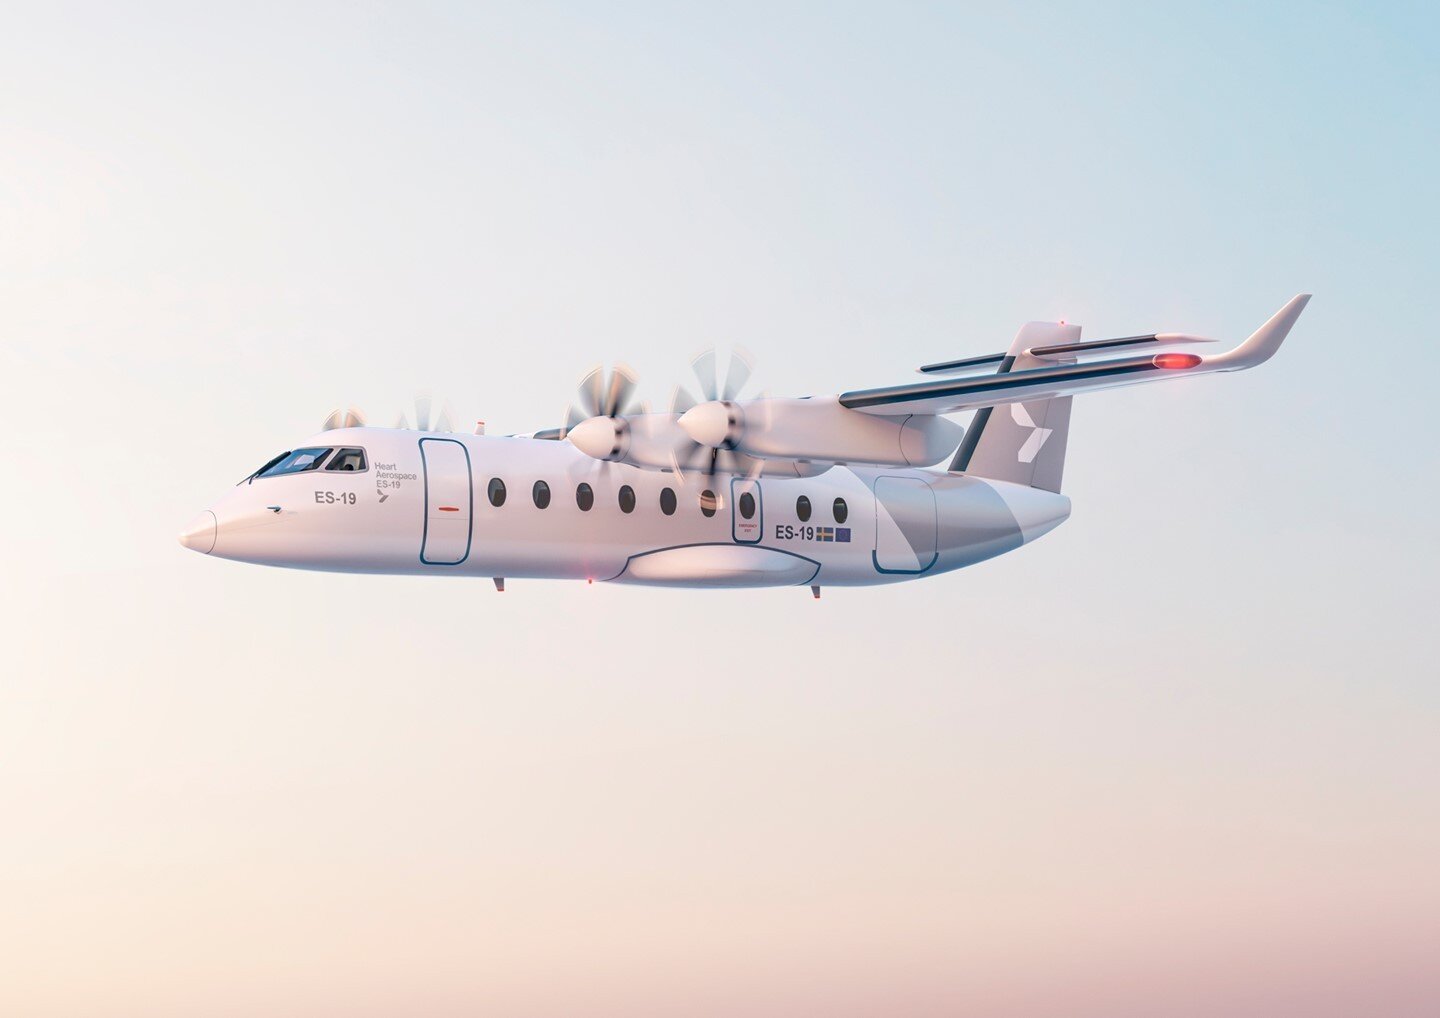 ⚡️ Everything Electric!!⁠
⁠
We signed an agreement with @heartaerospace to acquire the ES-19 aircraft, a 19 seat electric aircraft with the potential to decarbonize air travel. ⁠
⁠
The ES-19 can fly up to 250 miles with minimum noise and zero operati